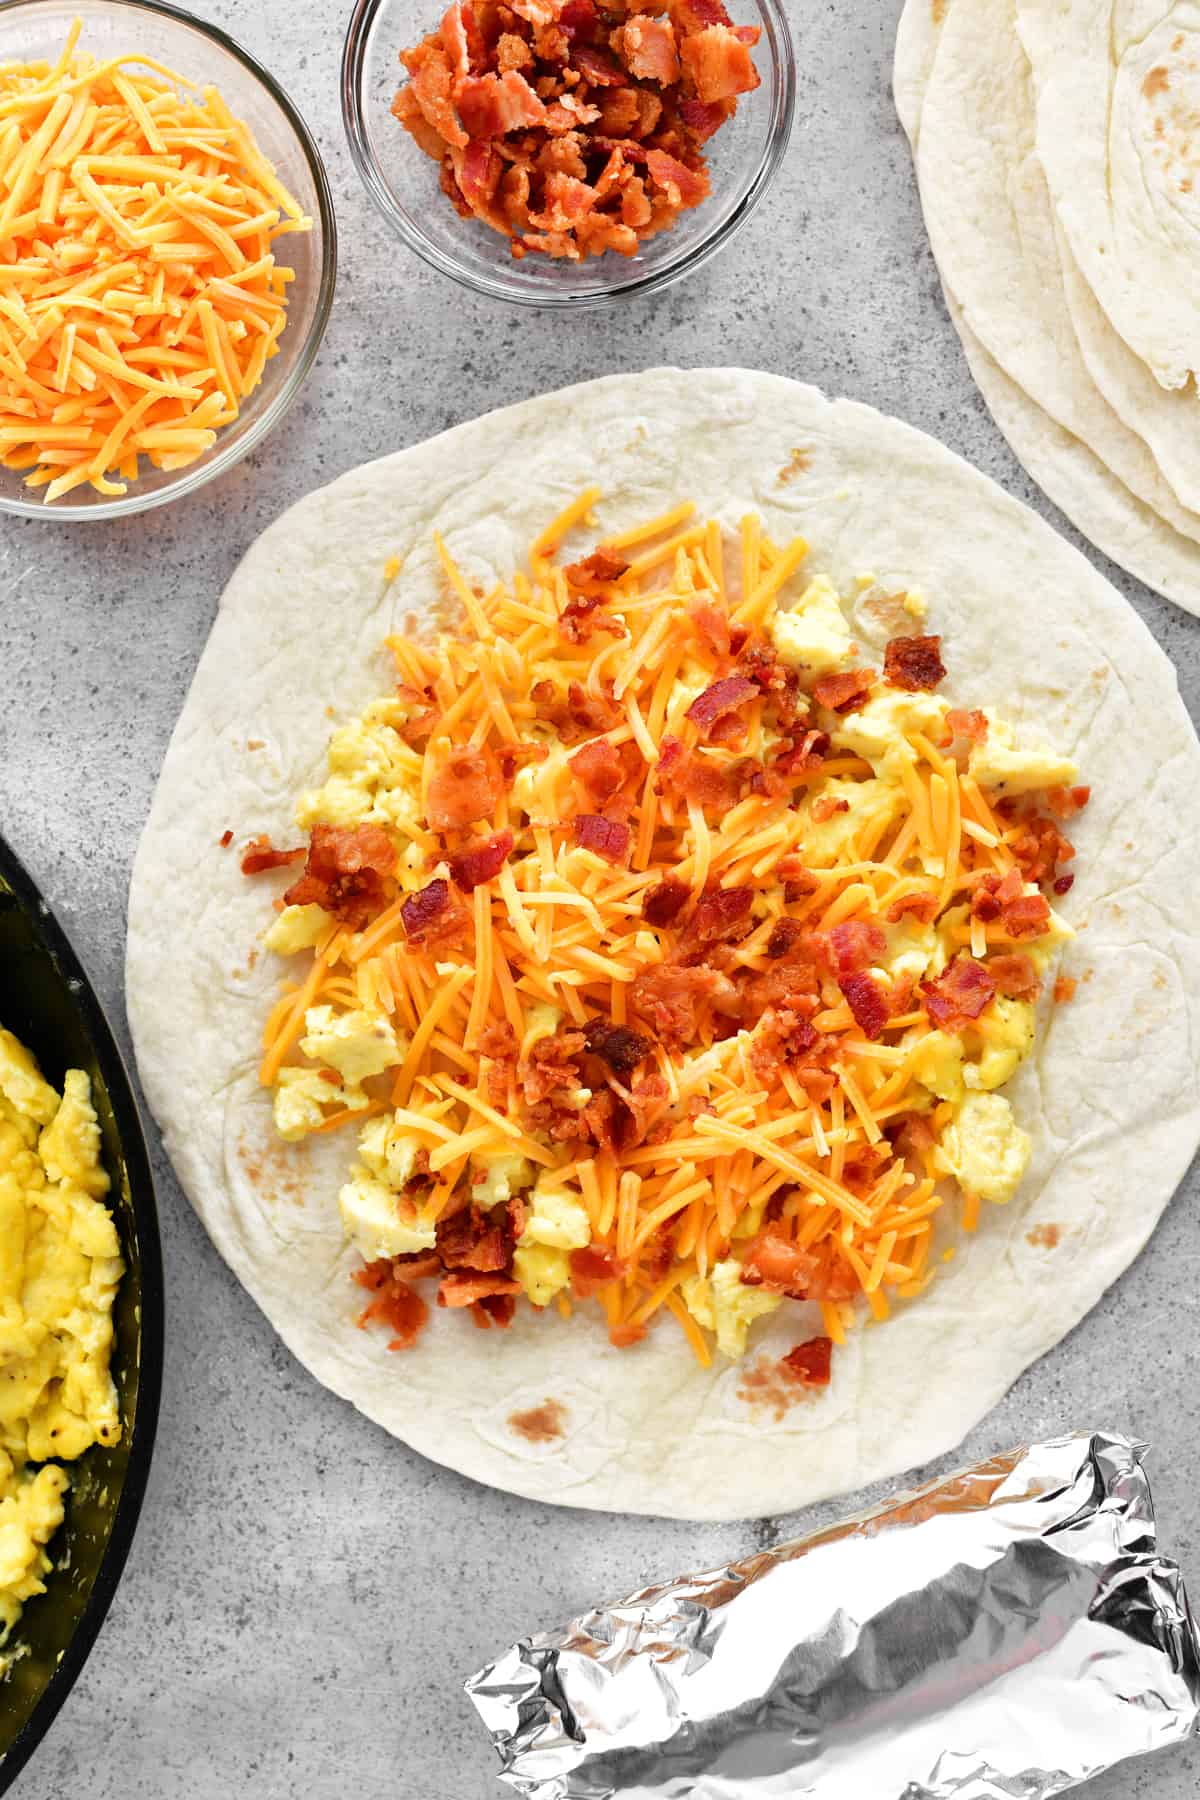 assembling a bacon egg and cheese breakfast burrito